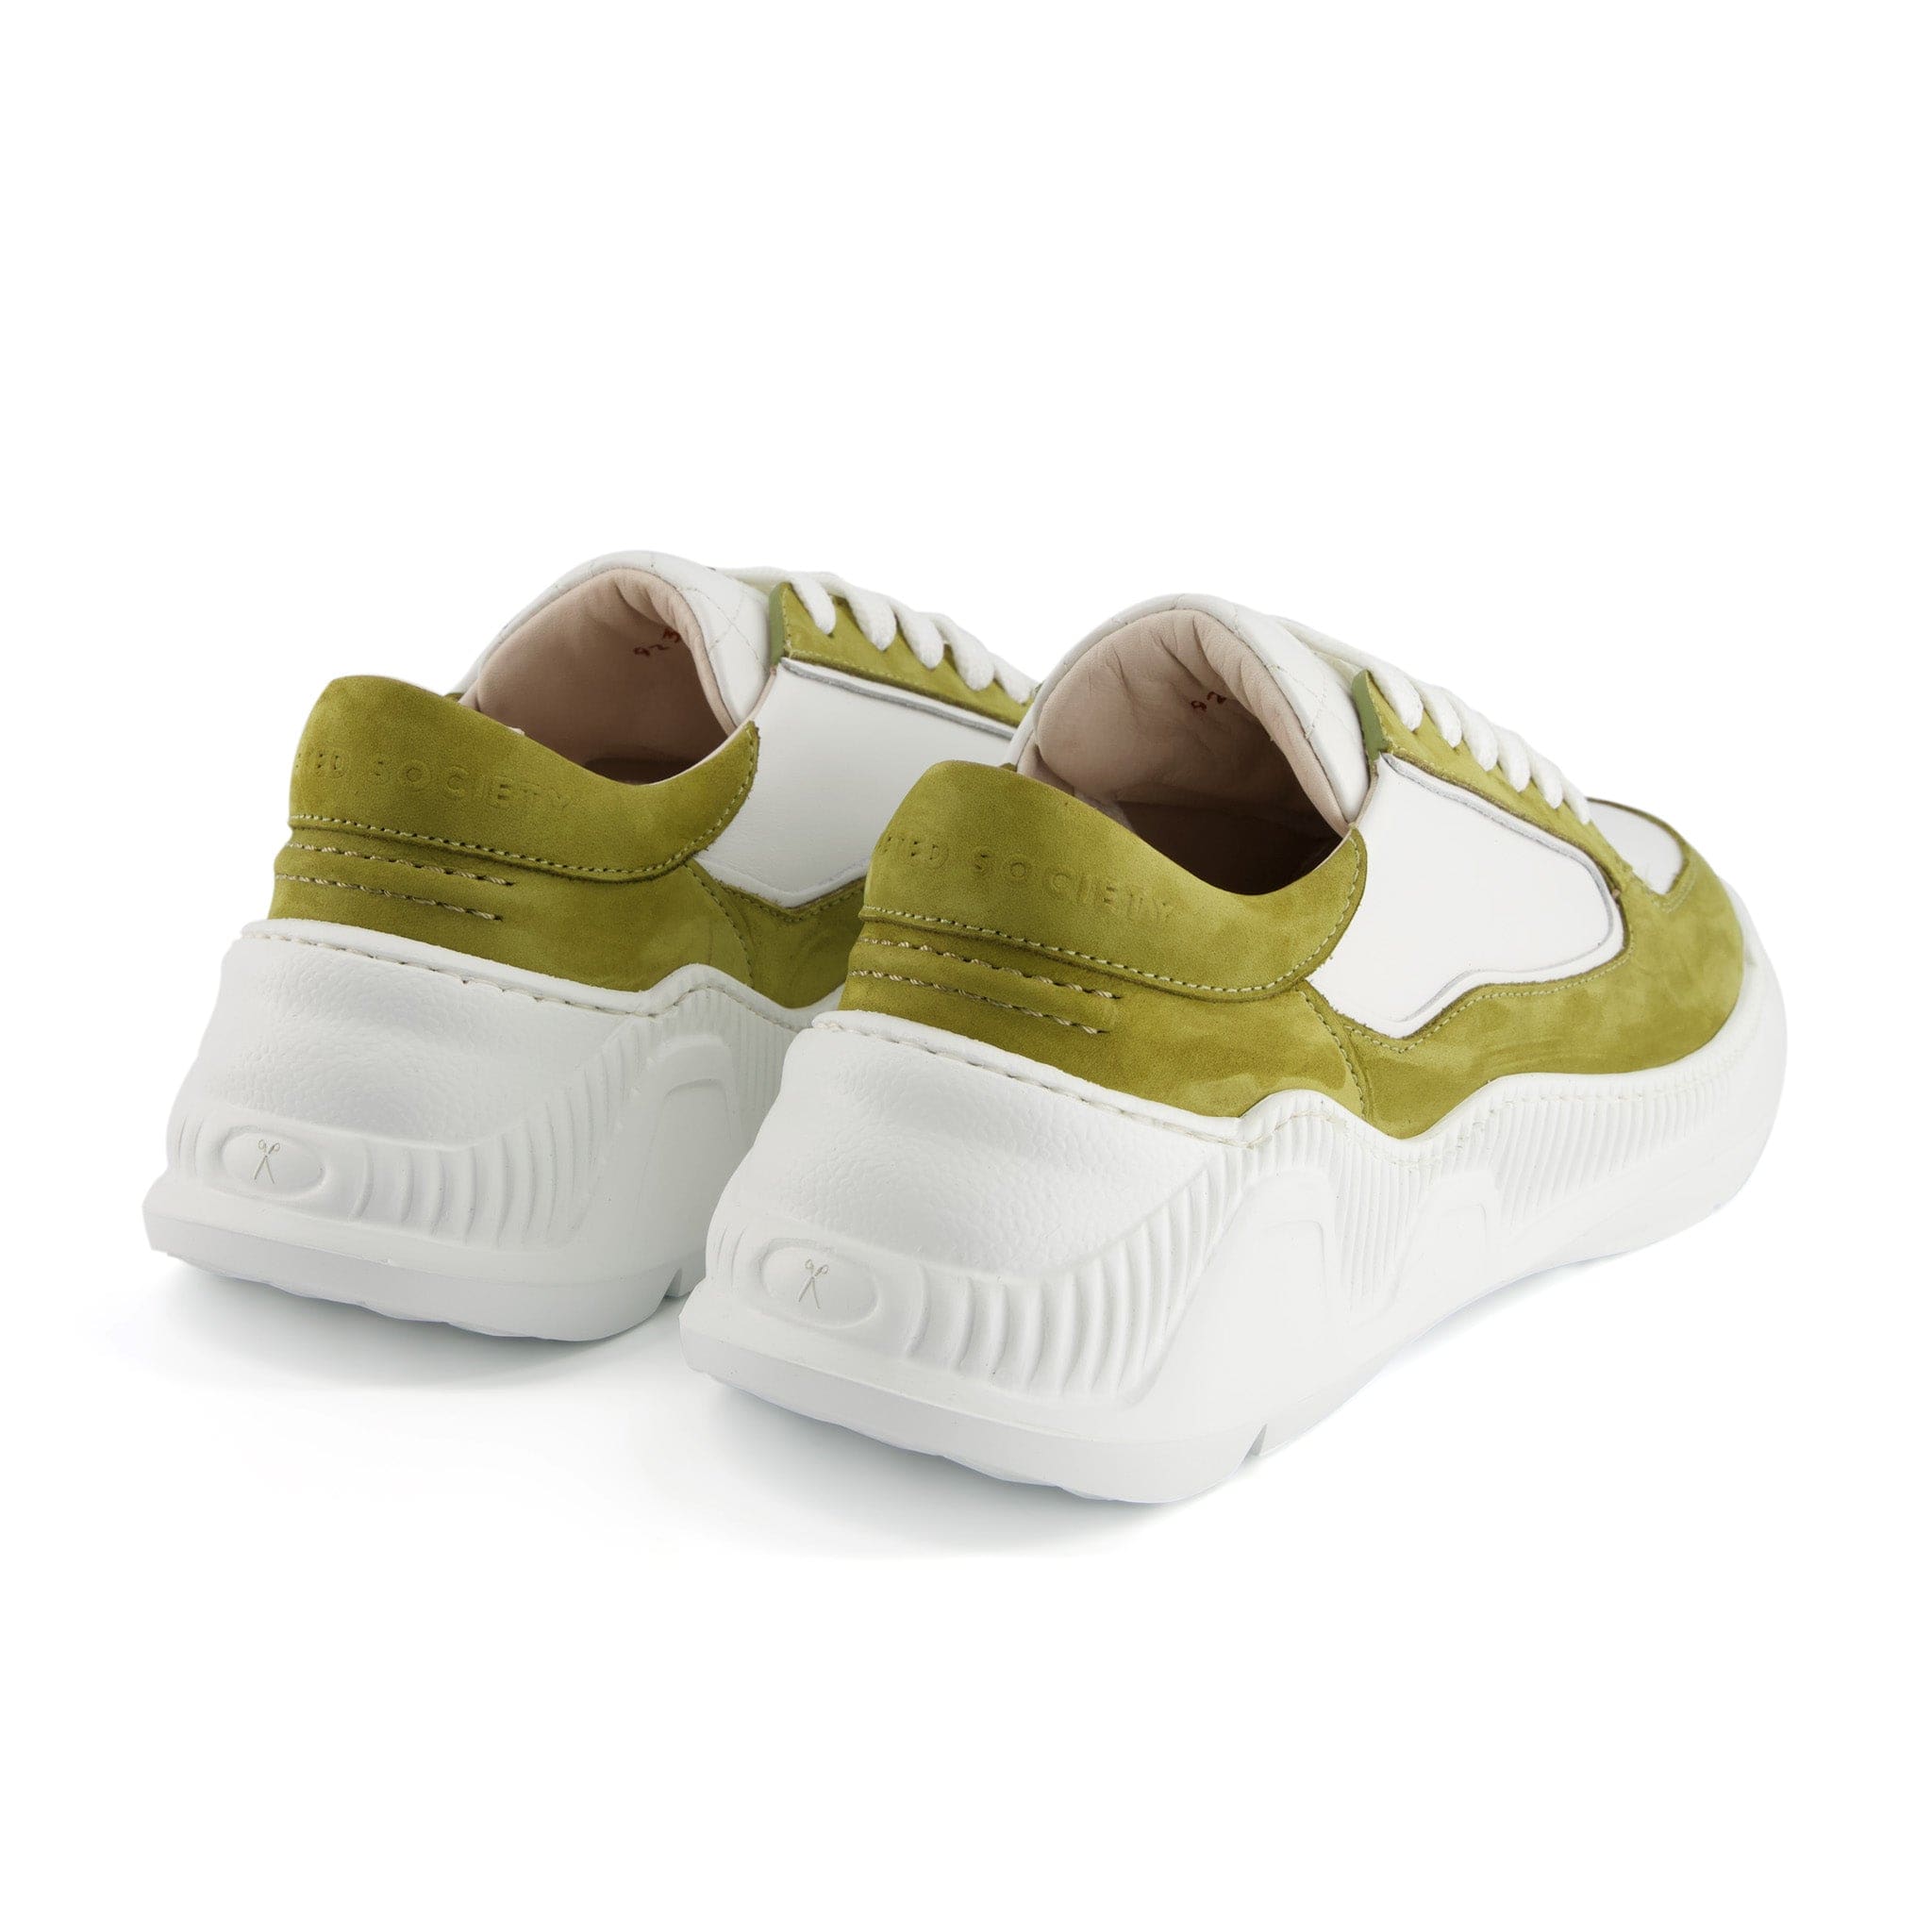 Nesto Low Top Italian Leather Sneaker | Light Olive and White | Made in Italy